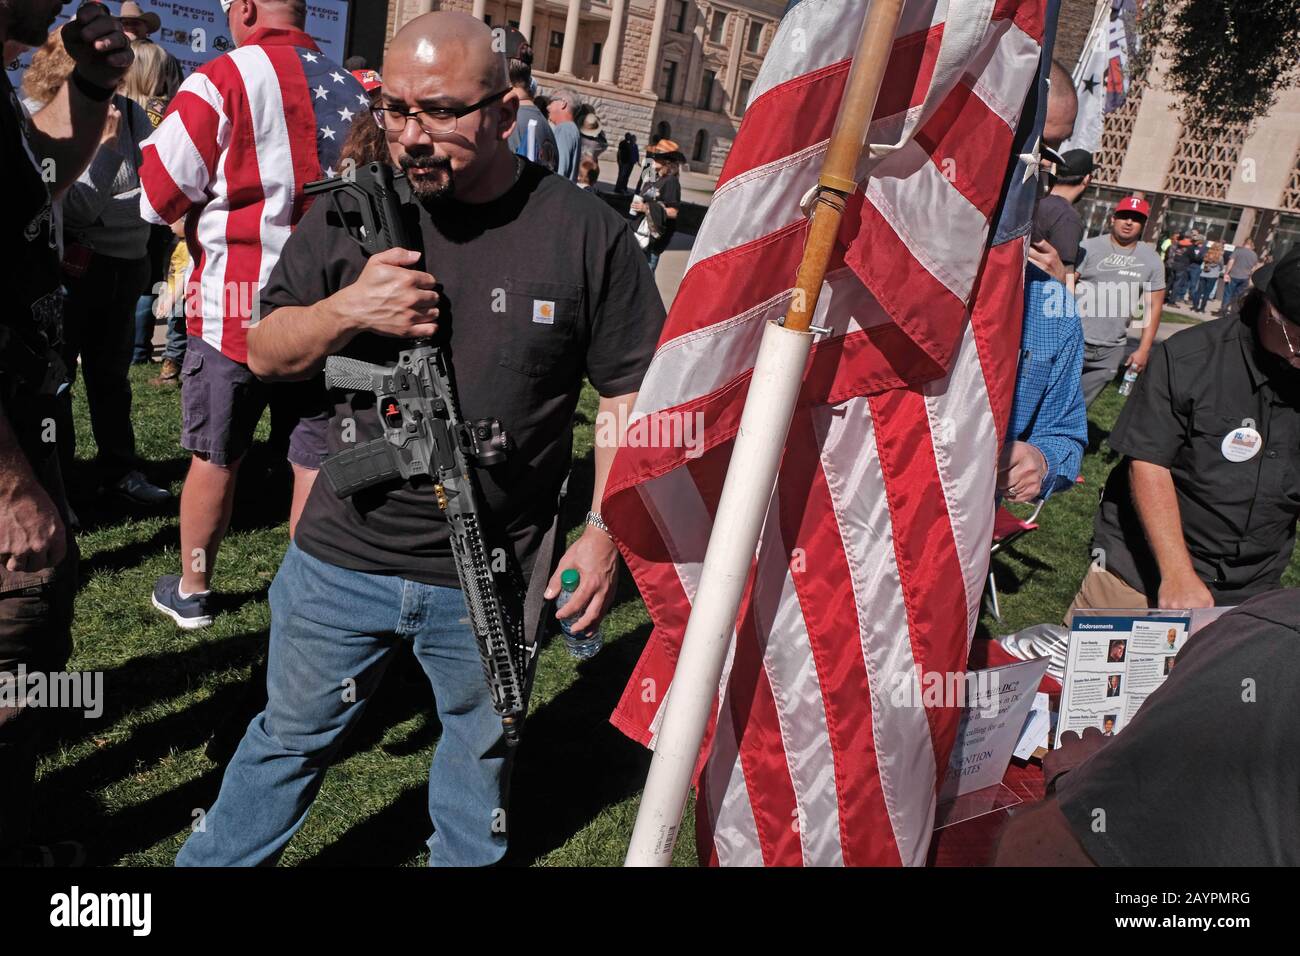 Phoenix, Arizona, USA. 15th Feb, 2020. About 1500 gun rights supporters gather at the Arizona State Capitol in support of the 2nd Ammendment. The rally was called ' Celebrate and Protect the 2nd Ammendment''. Arizona is an open carry state and advocates carry various types of long rifles to show their opposition to any proposed ban on assault weapons. They also are against so called Red Flag laws which allow police to temporarily take away guns from an individual they deam to be a threat against themselves or society. Most show support of President Trump and his strong support for any ch Stock Photo